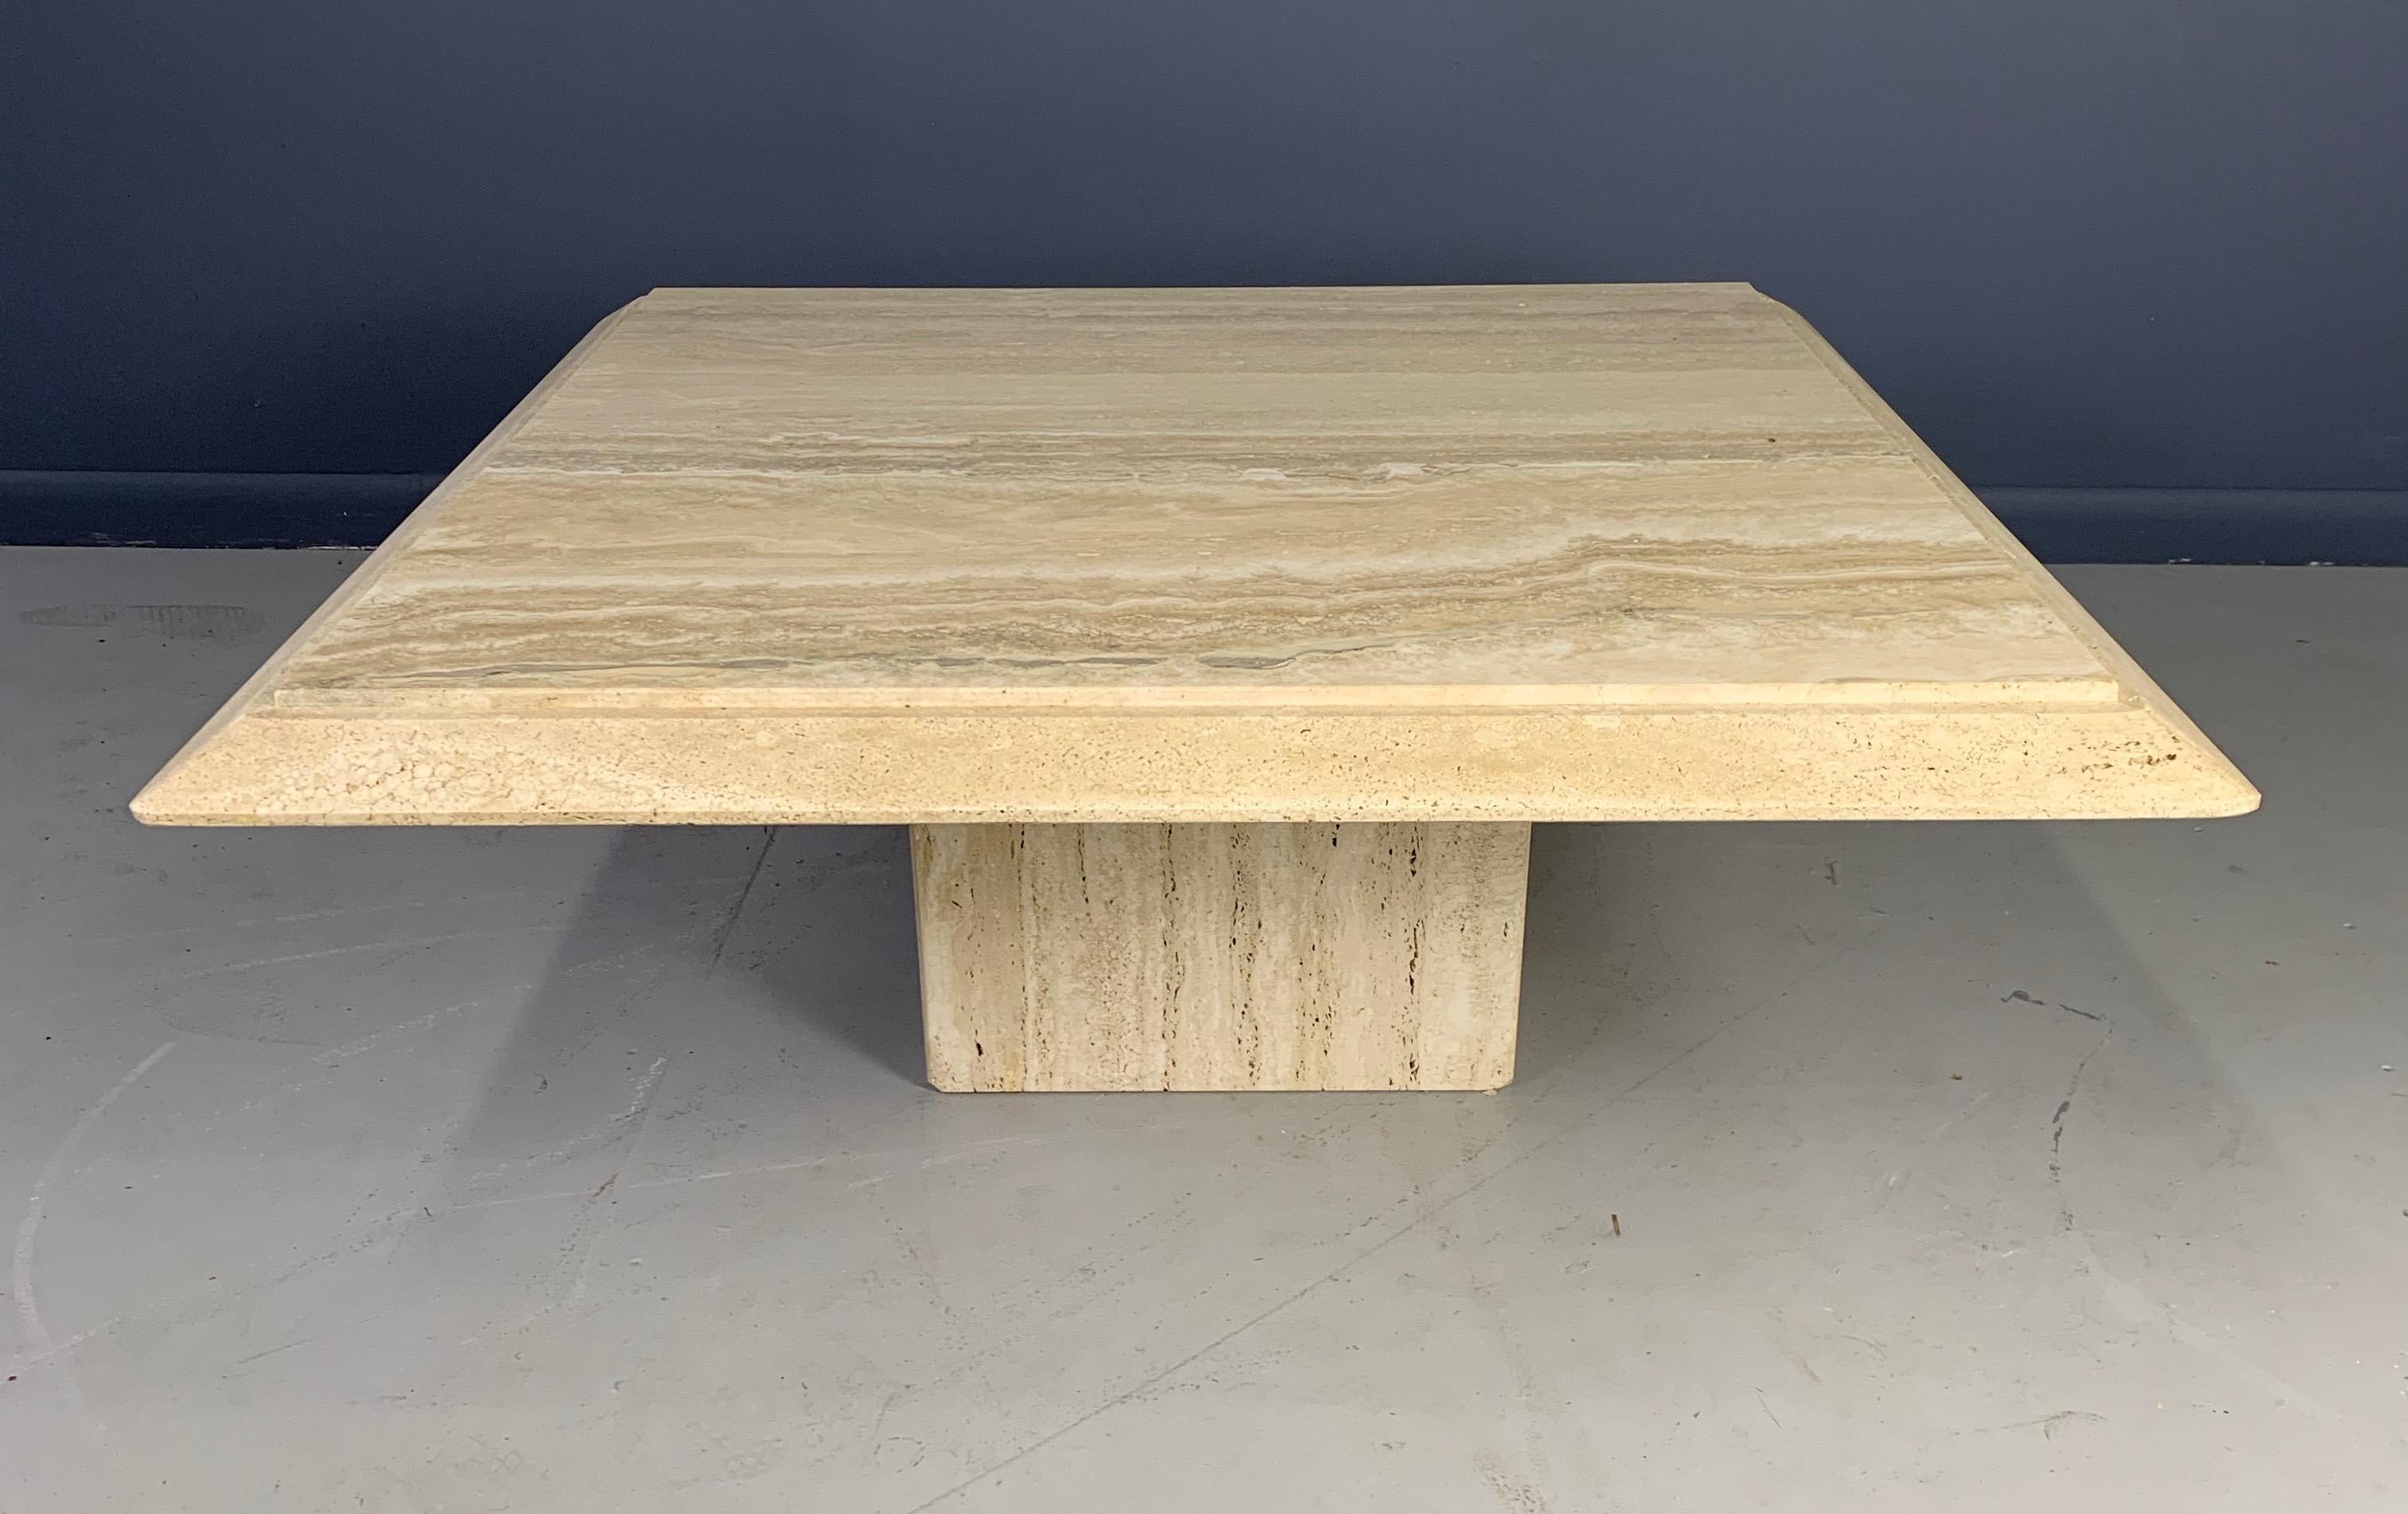 Dramatically veined travertine is the highlight of this table. The unusual unhoned edge treatment creates a visually stunning effect. The minimalistic simplicity of design would compliment many design projects.